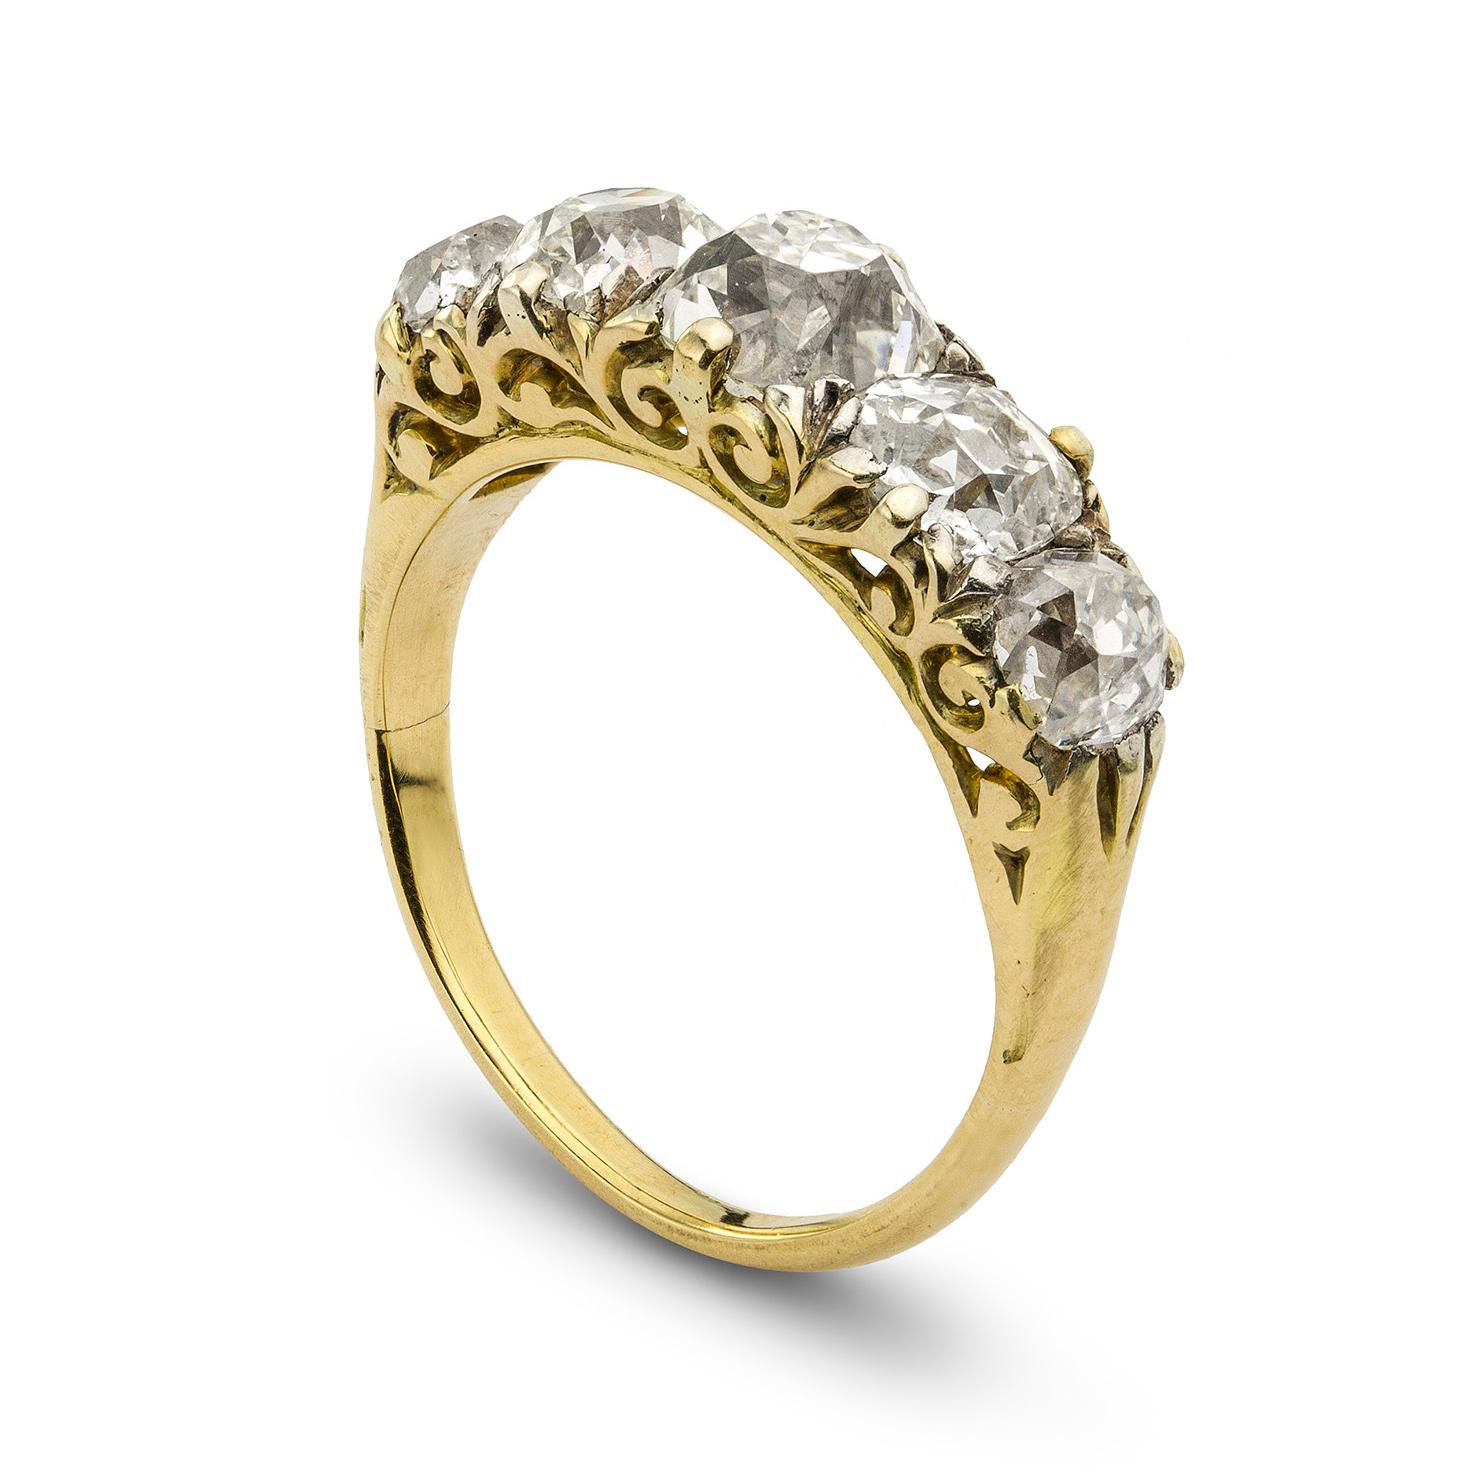 A Victorian five stone half carved hoop ring, the five graduating old brilliant-cut diamonds weighing 3.59 carats in total all set in gold to carved pierced mount, circa 1880, head measuring 0.7x2.2cm, gross weight 4.7 grams. Finger size N 1/2

This